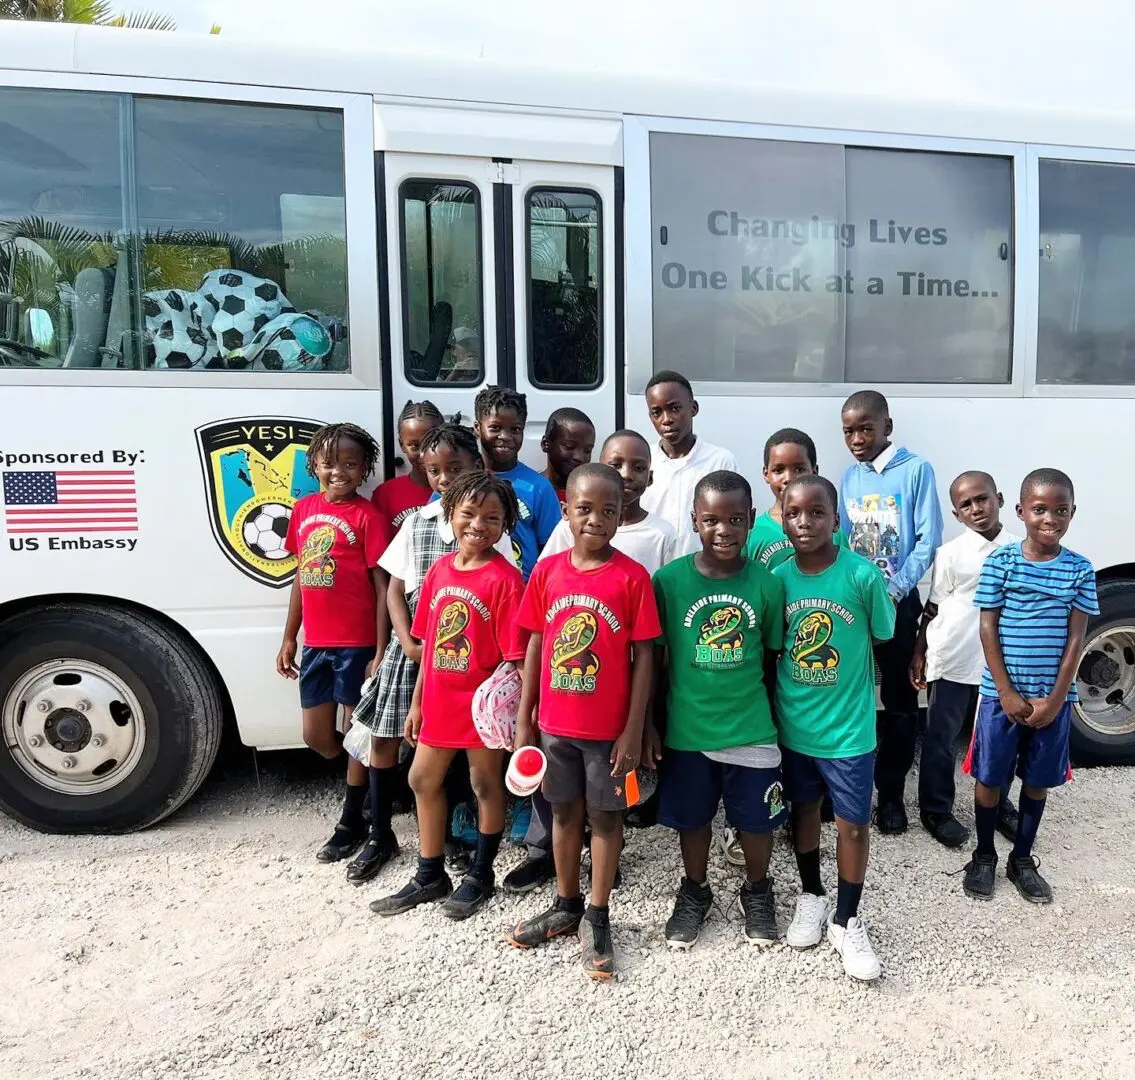 A group of children standing in front of a bus.